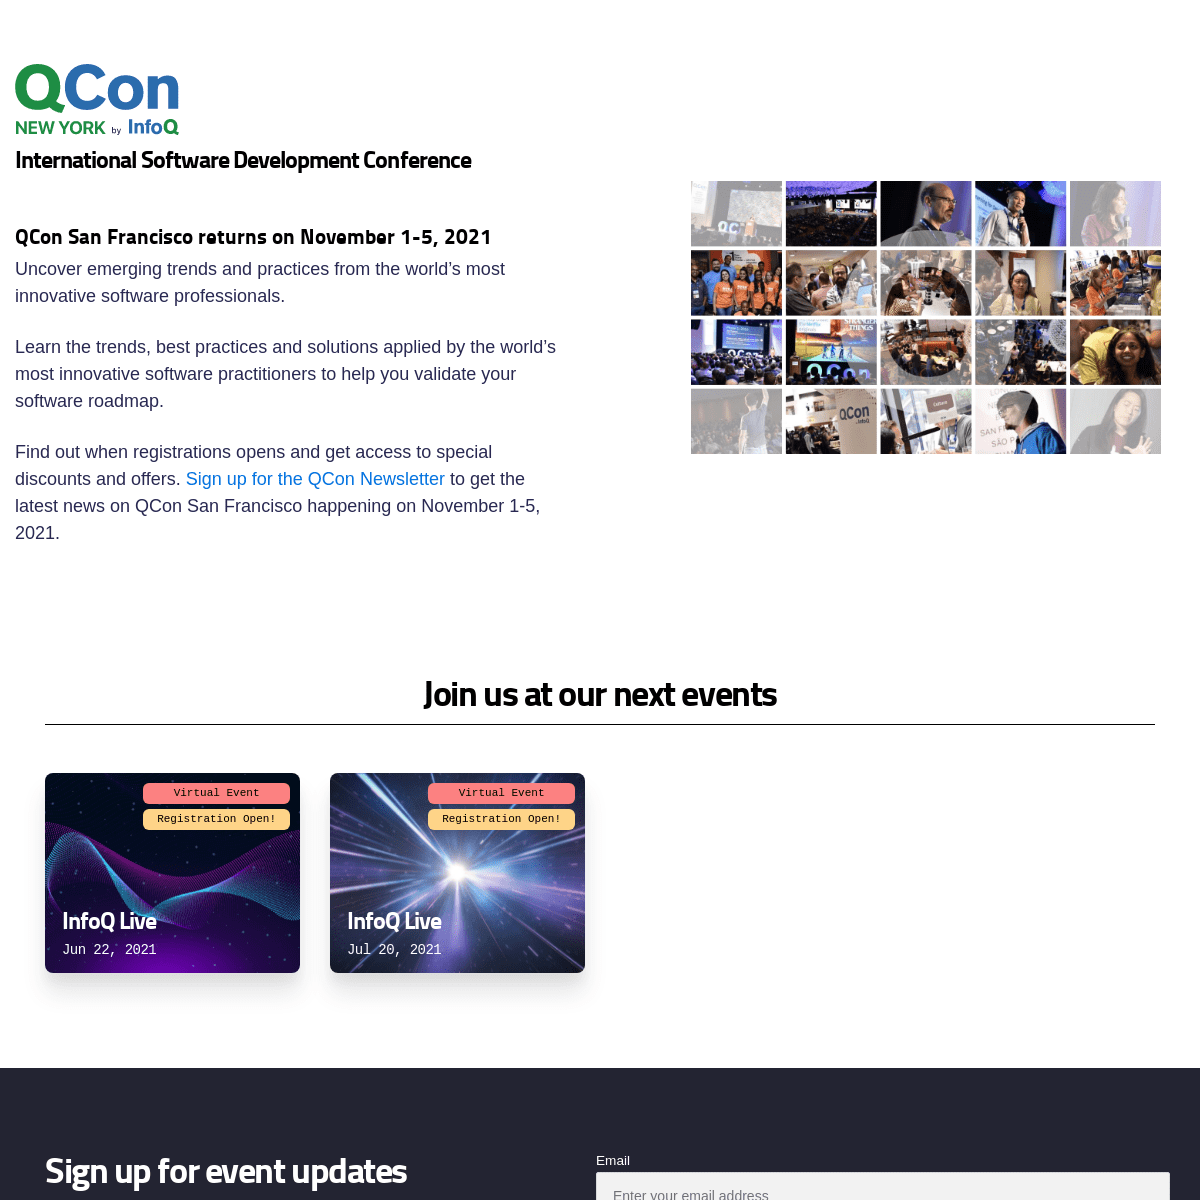 A complete backup of https://qconnewyork.com